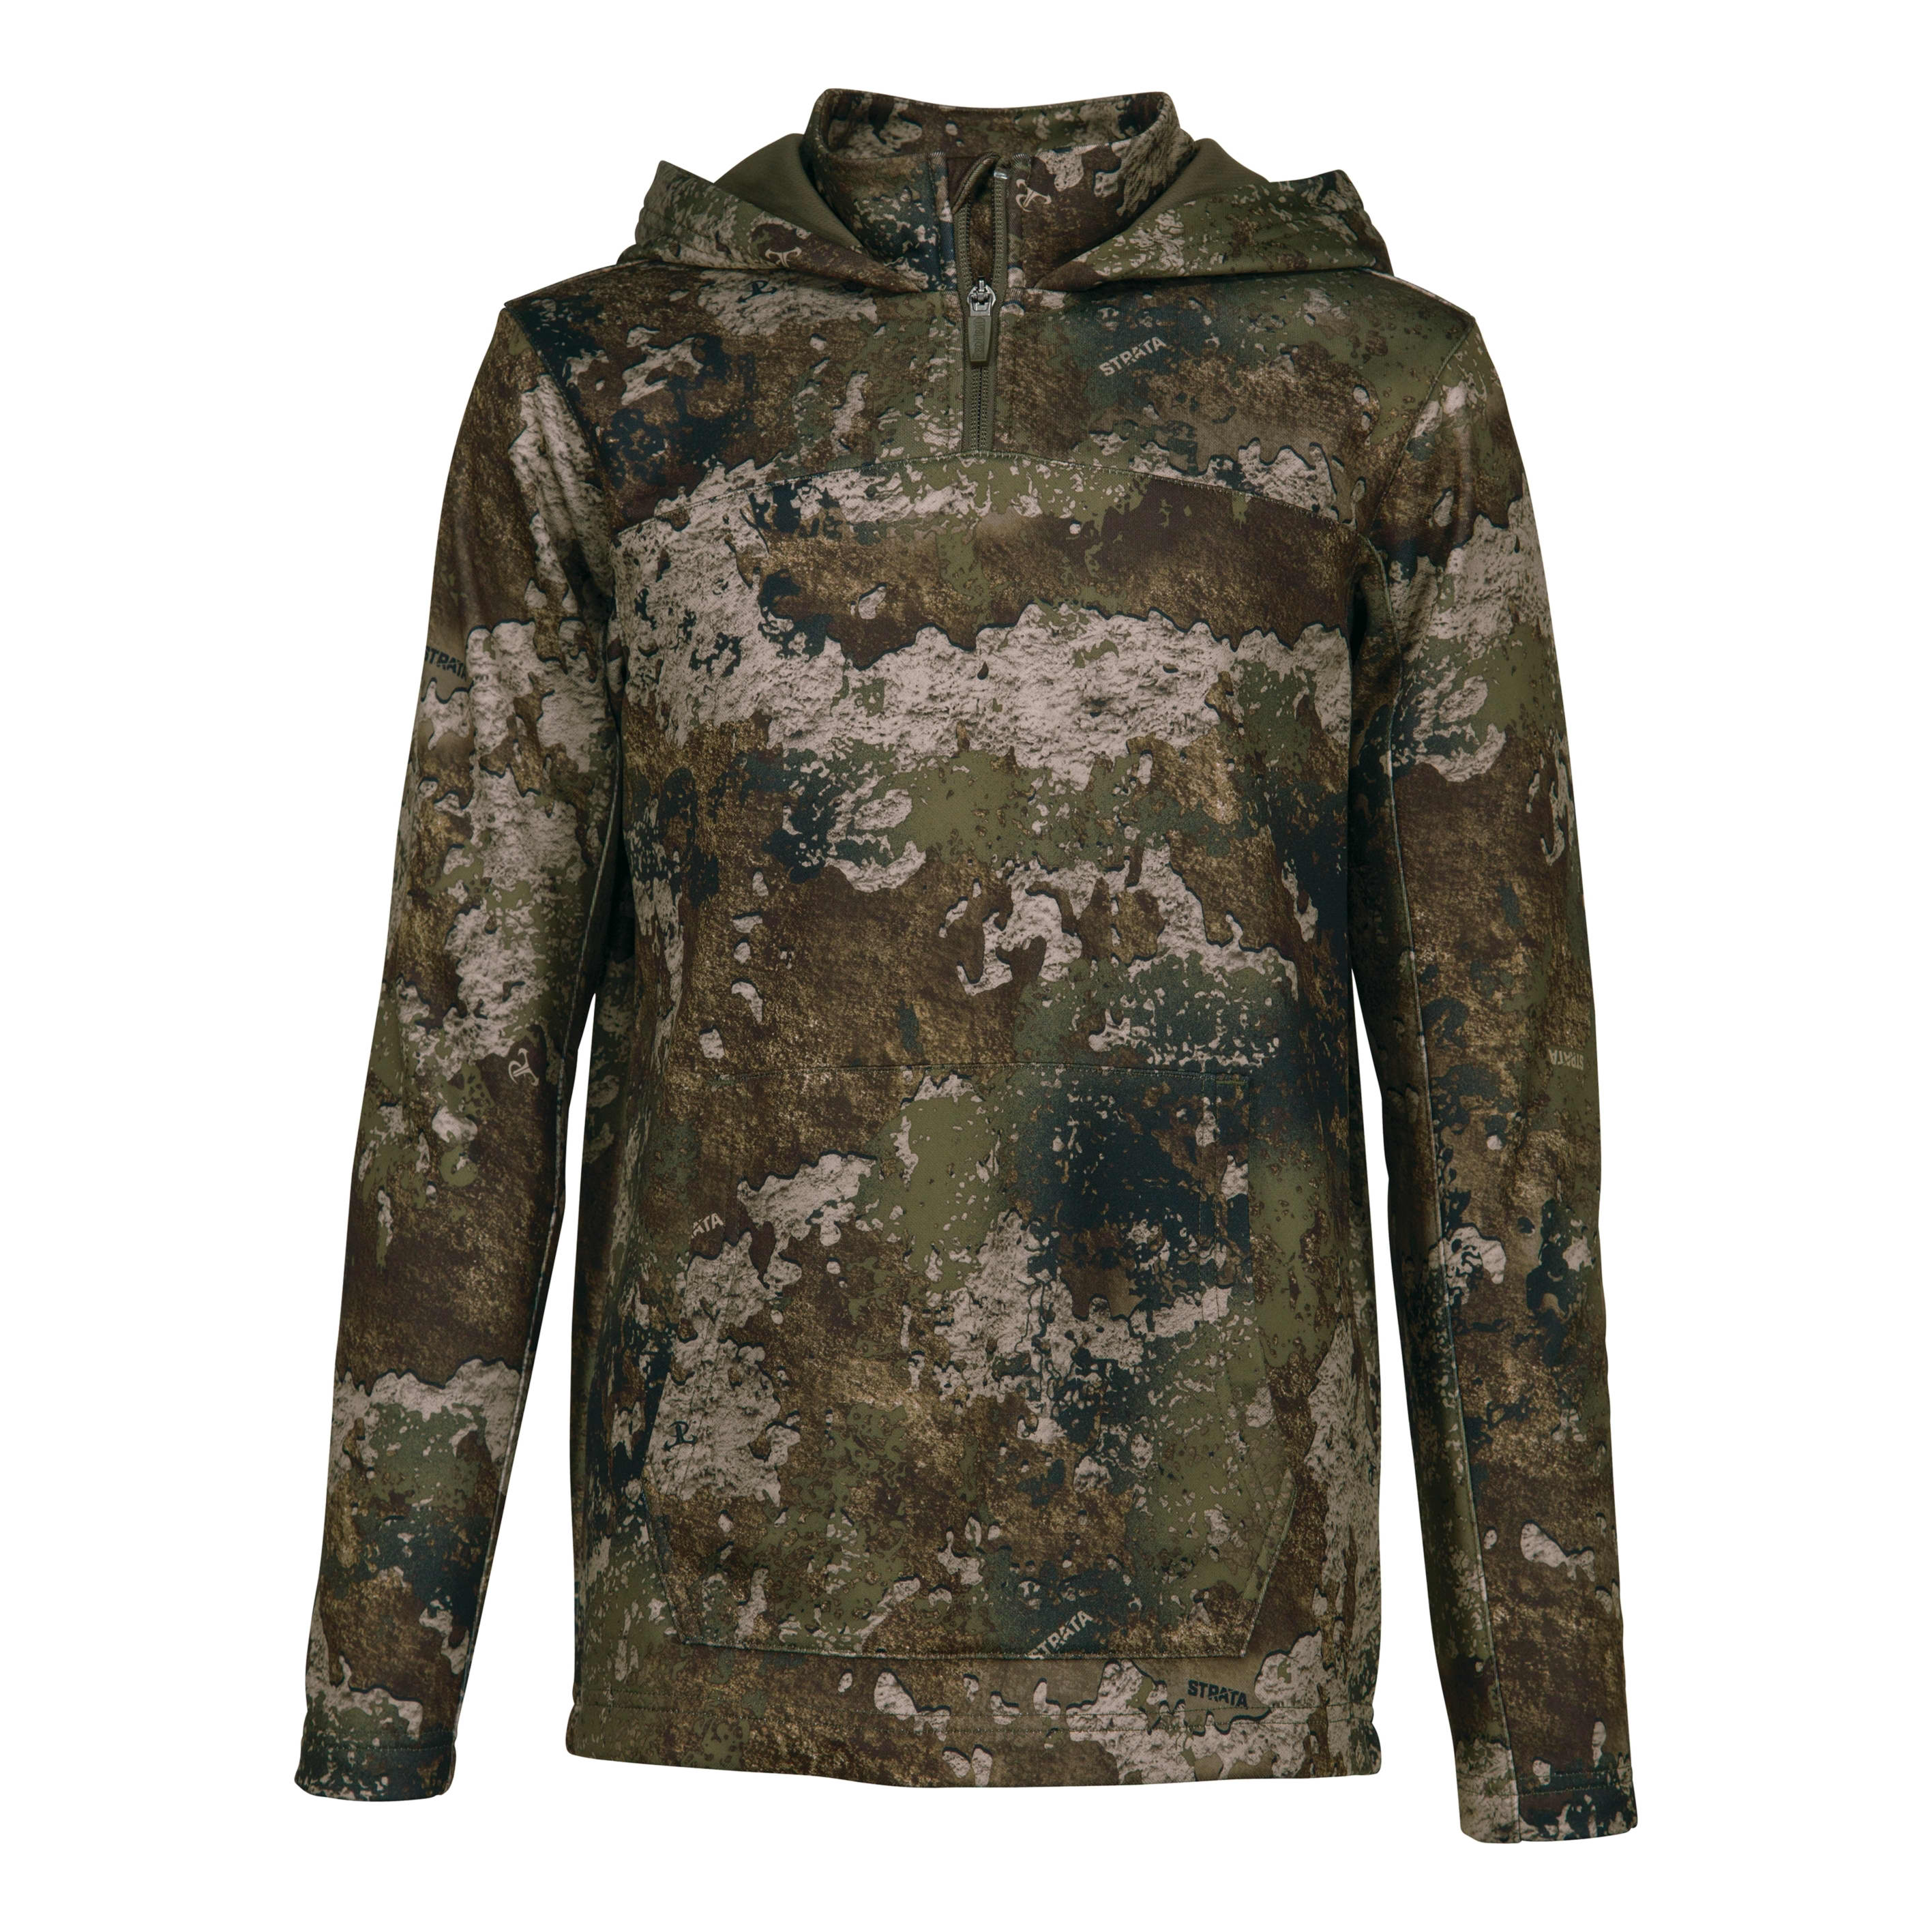 Cabela's® Infants'/Toddlers' Camo Hoodie